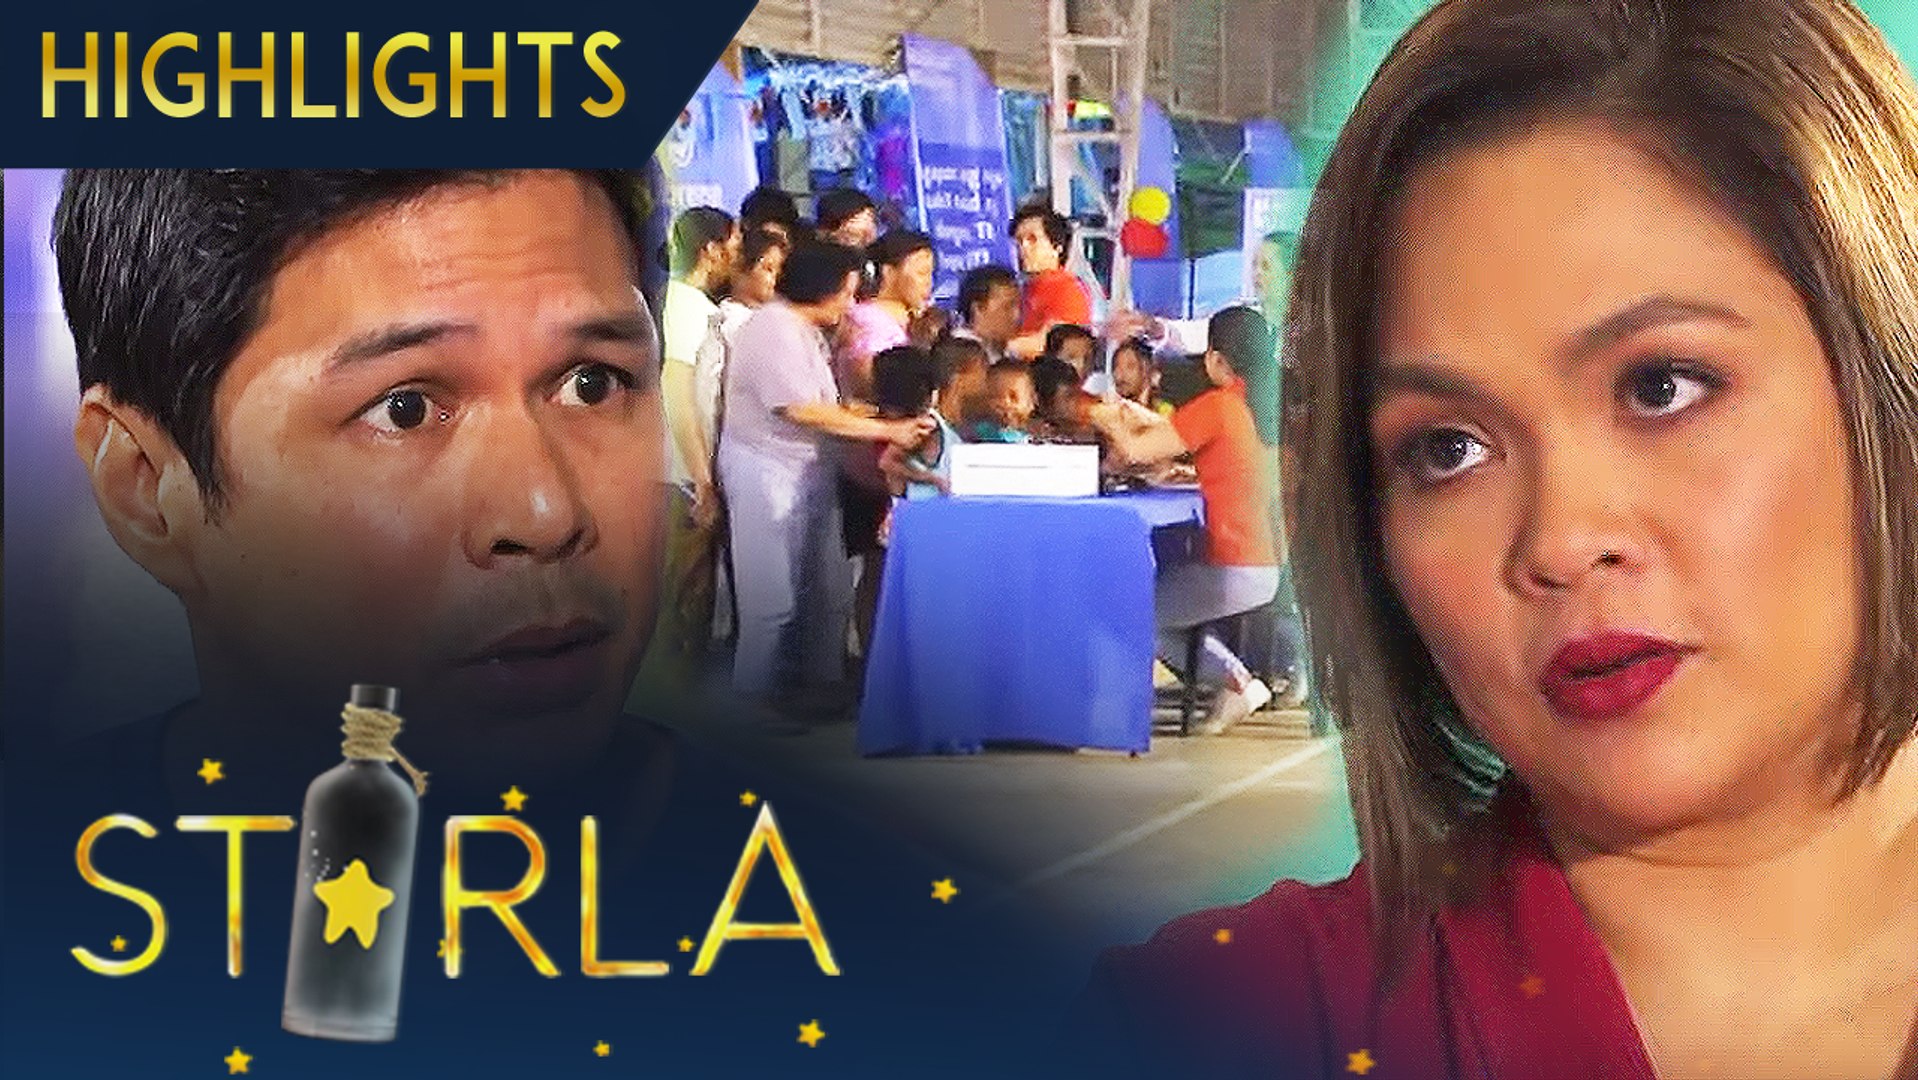 Doc Philip confronts Teresa about her medical mission | Starla